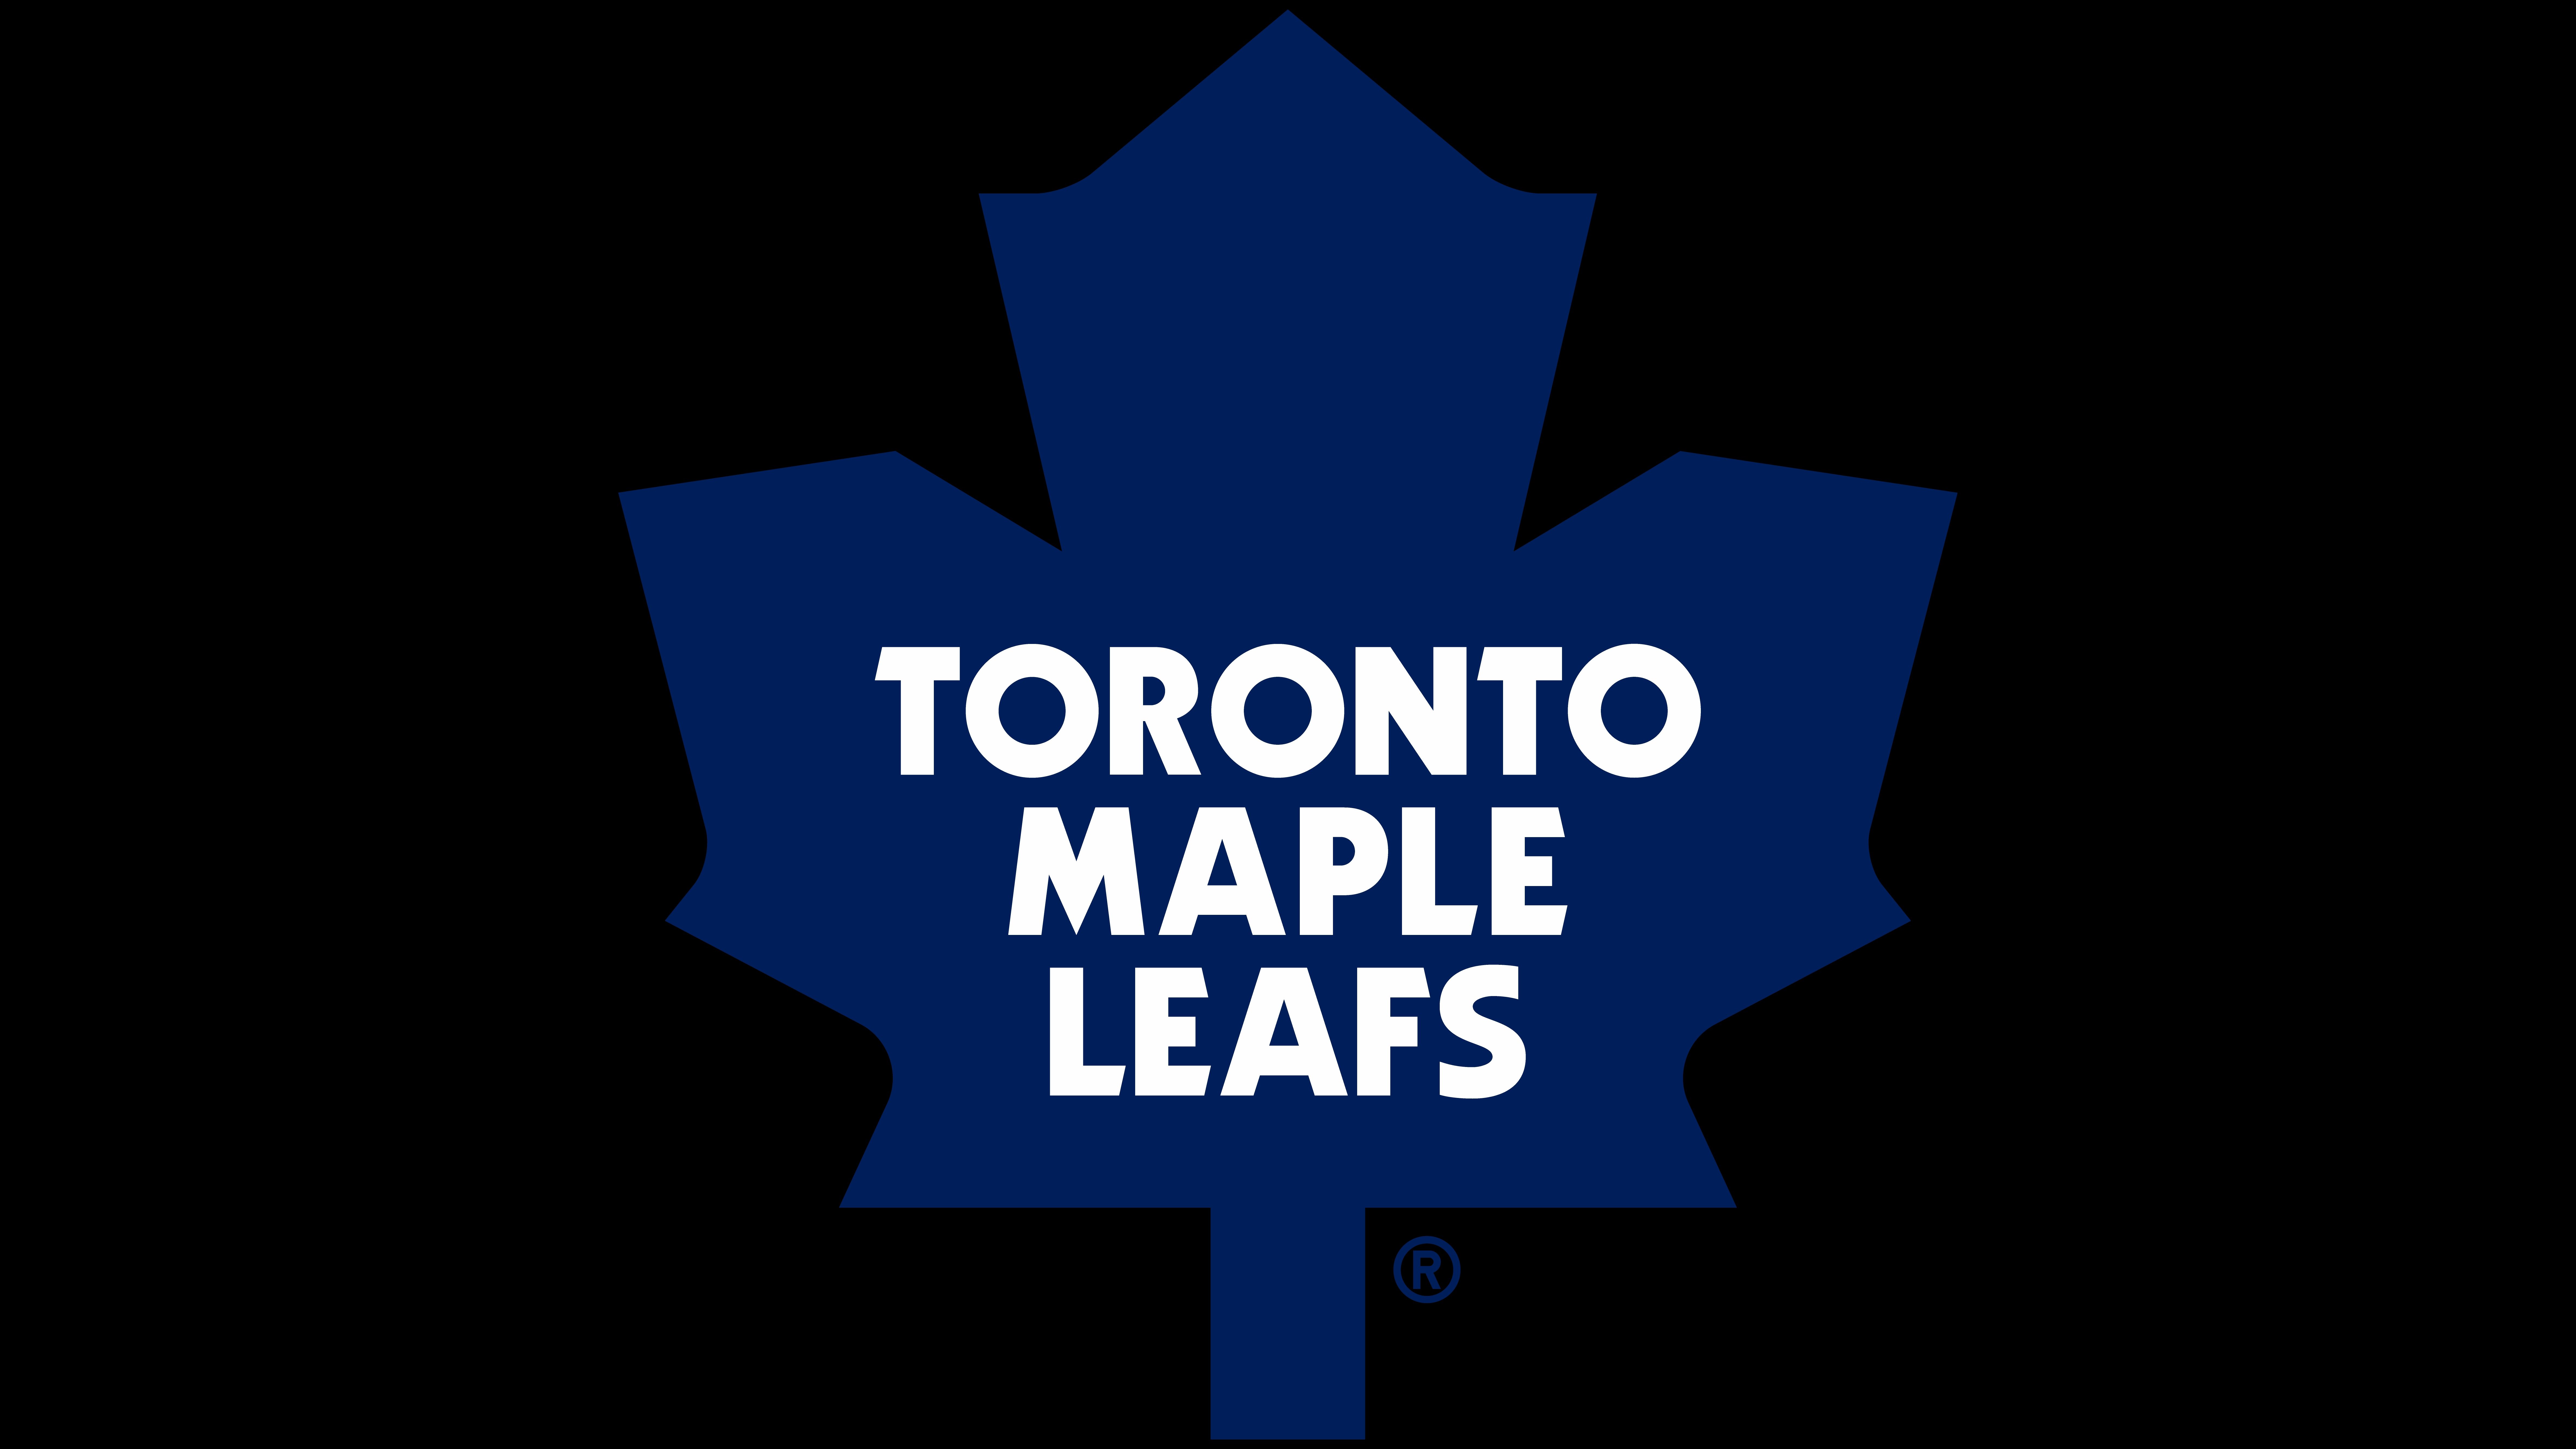 10 Toronto Maple Leafs HD Wallpapers Backgrounds - Wallpaper Abyss